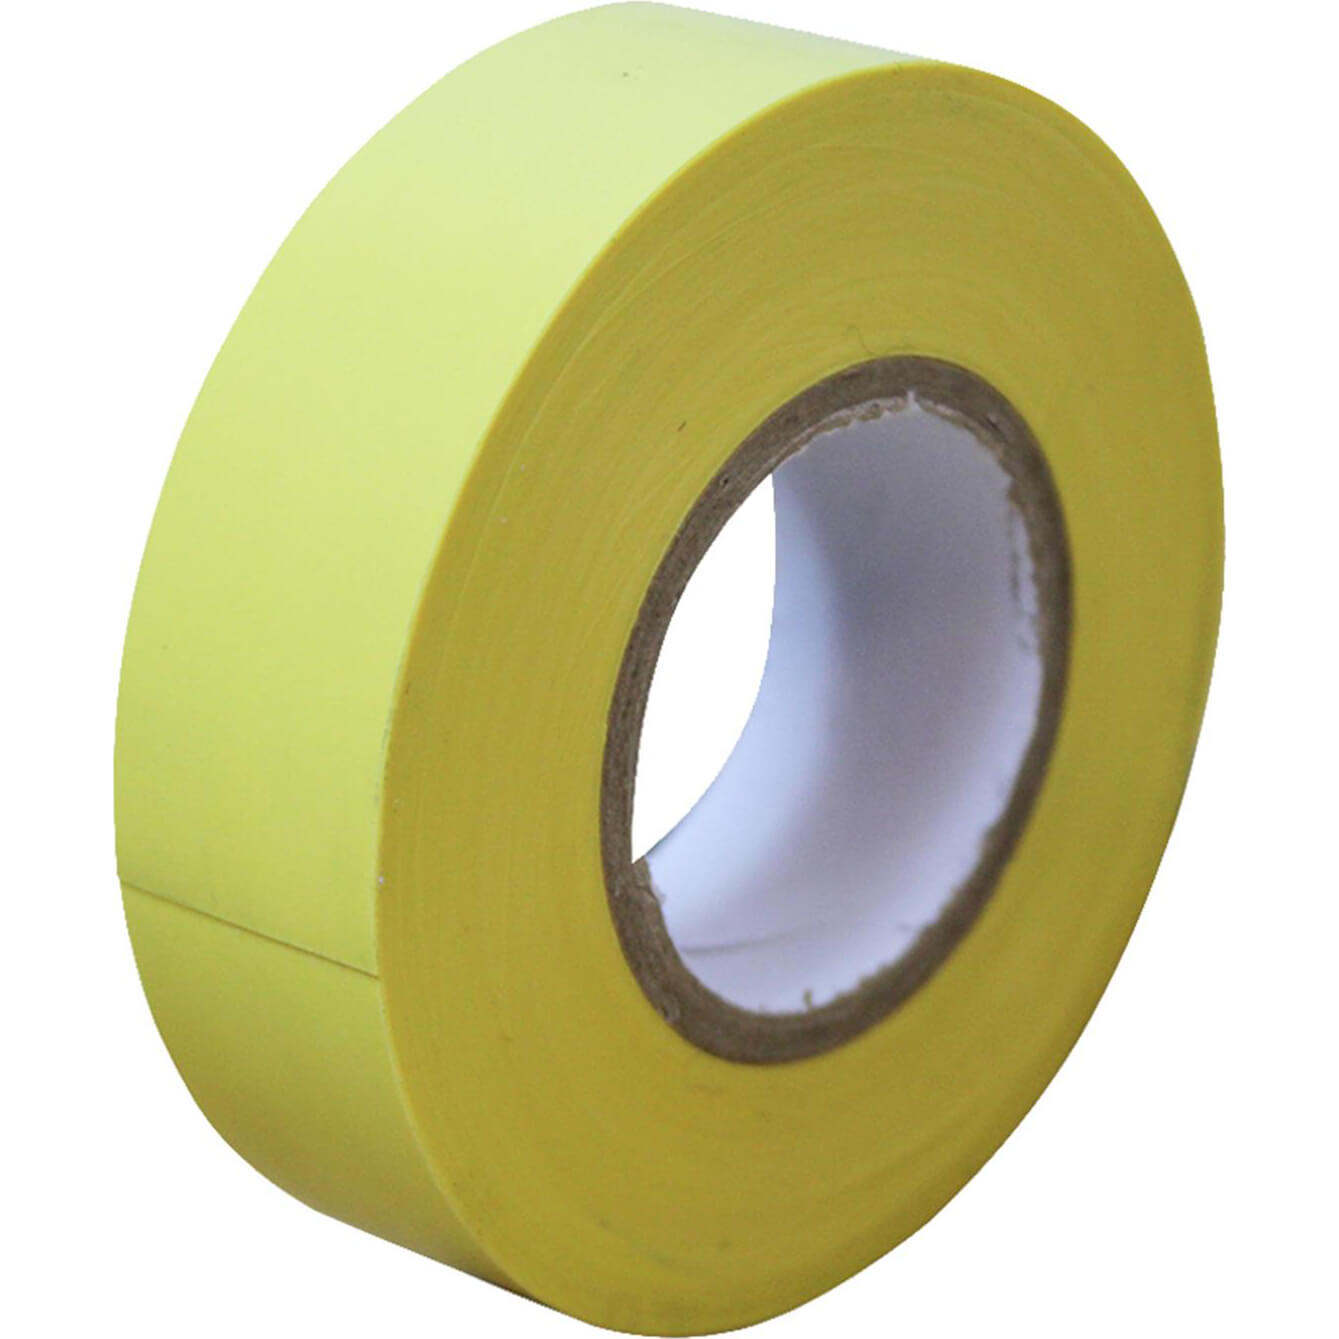 Insulation Tape Yellow 19mm Wide x 33m Roll